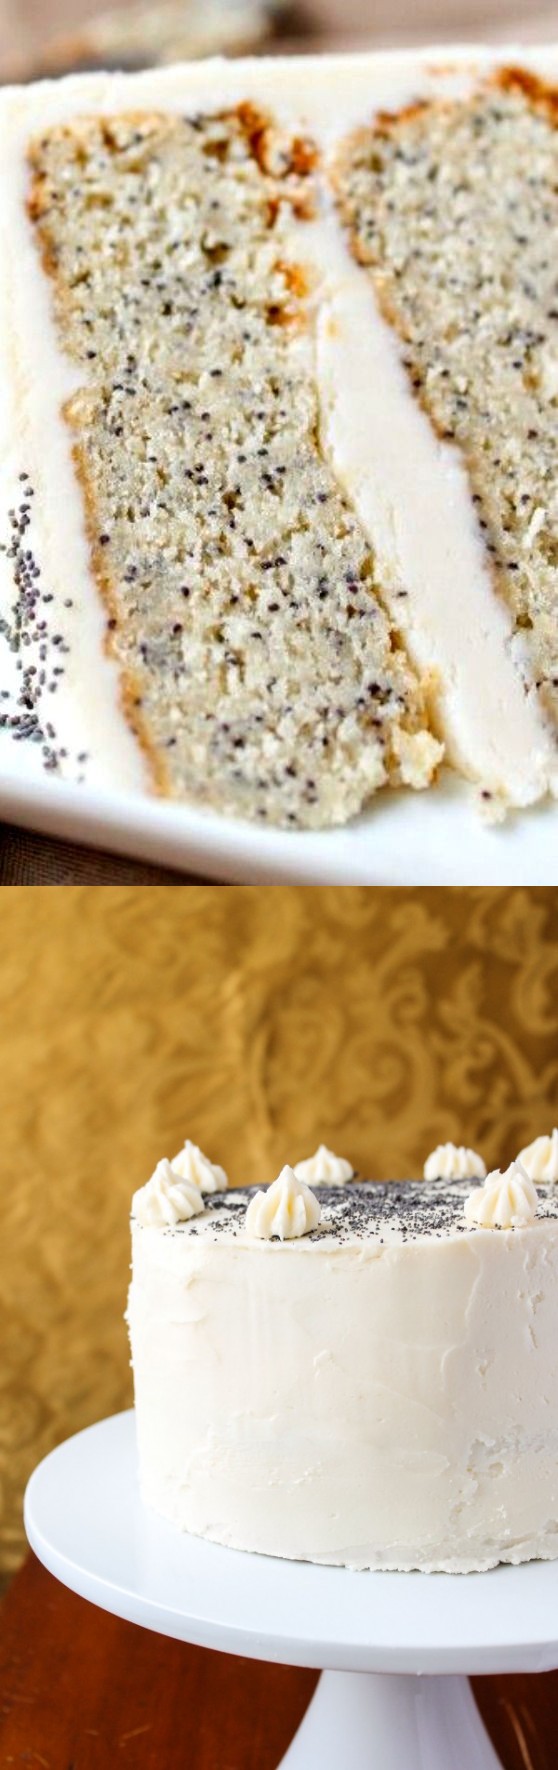 Spiced Poppyseed Cake with Almond Buttercream Frosting